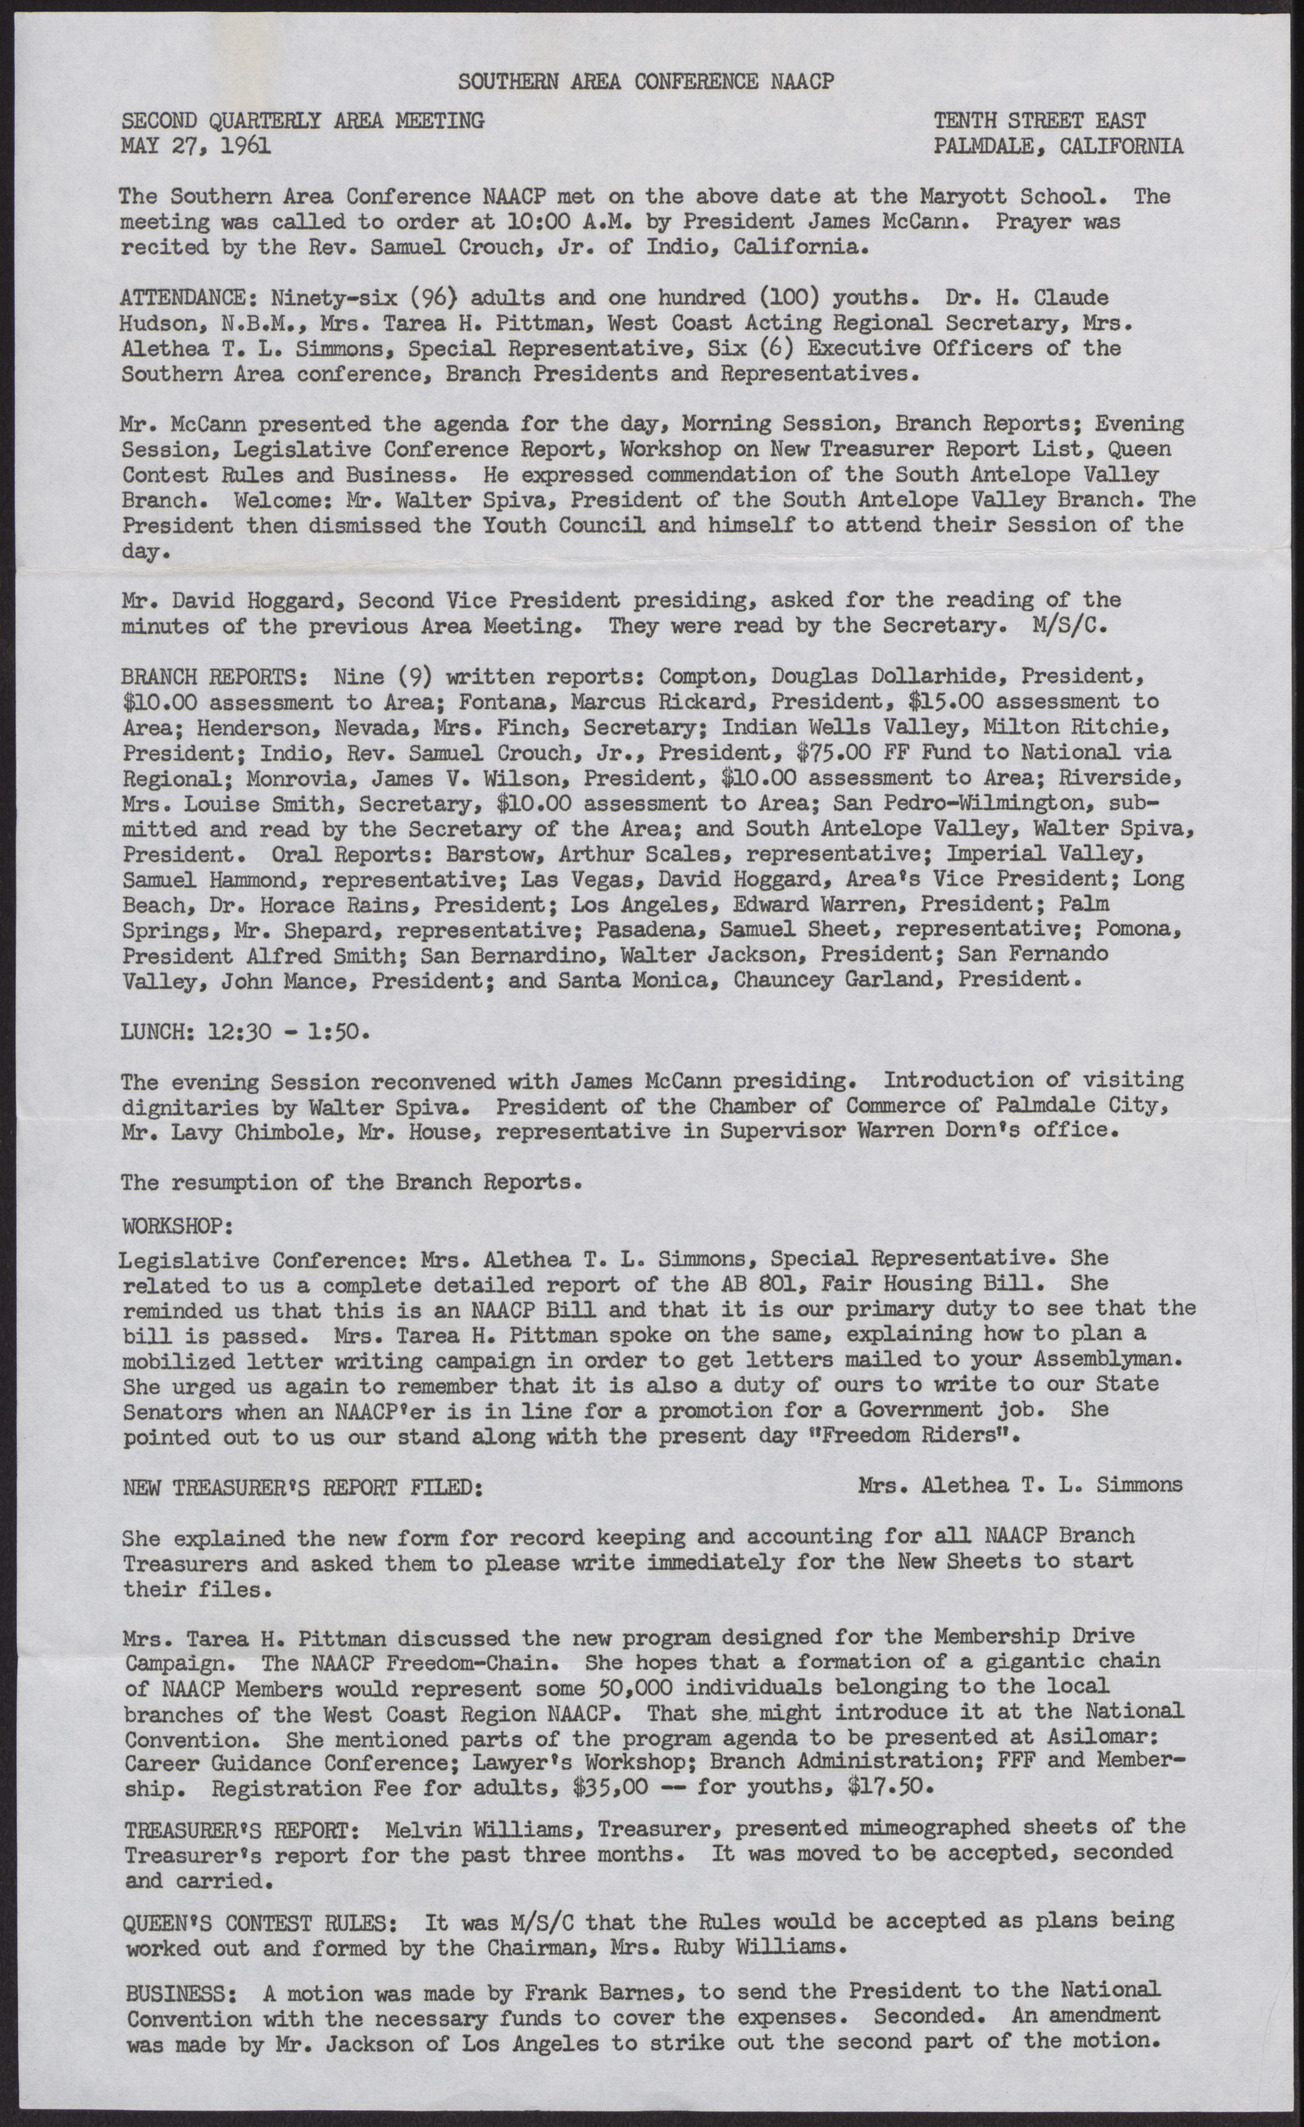 Minutes of the NAACP Second Quarterly Area Meeting of the Southern Area Conference (2 pages), May 27, 1961